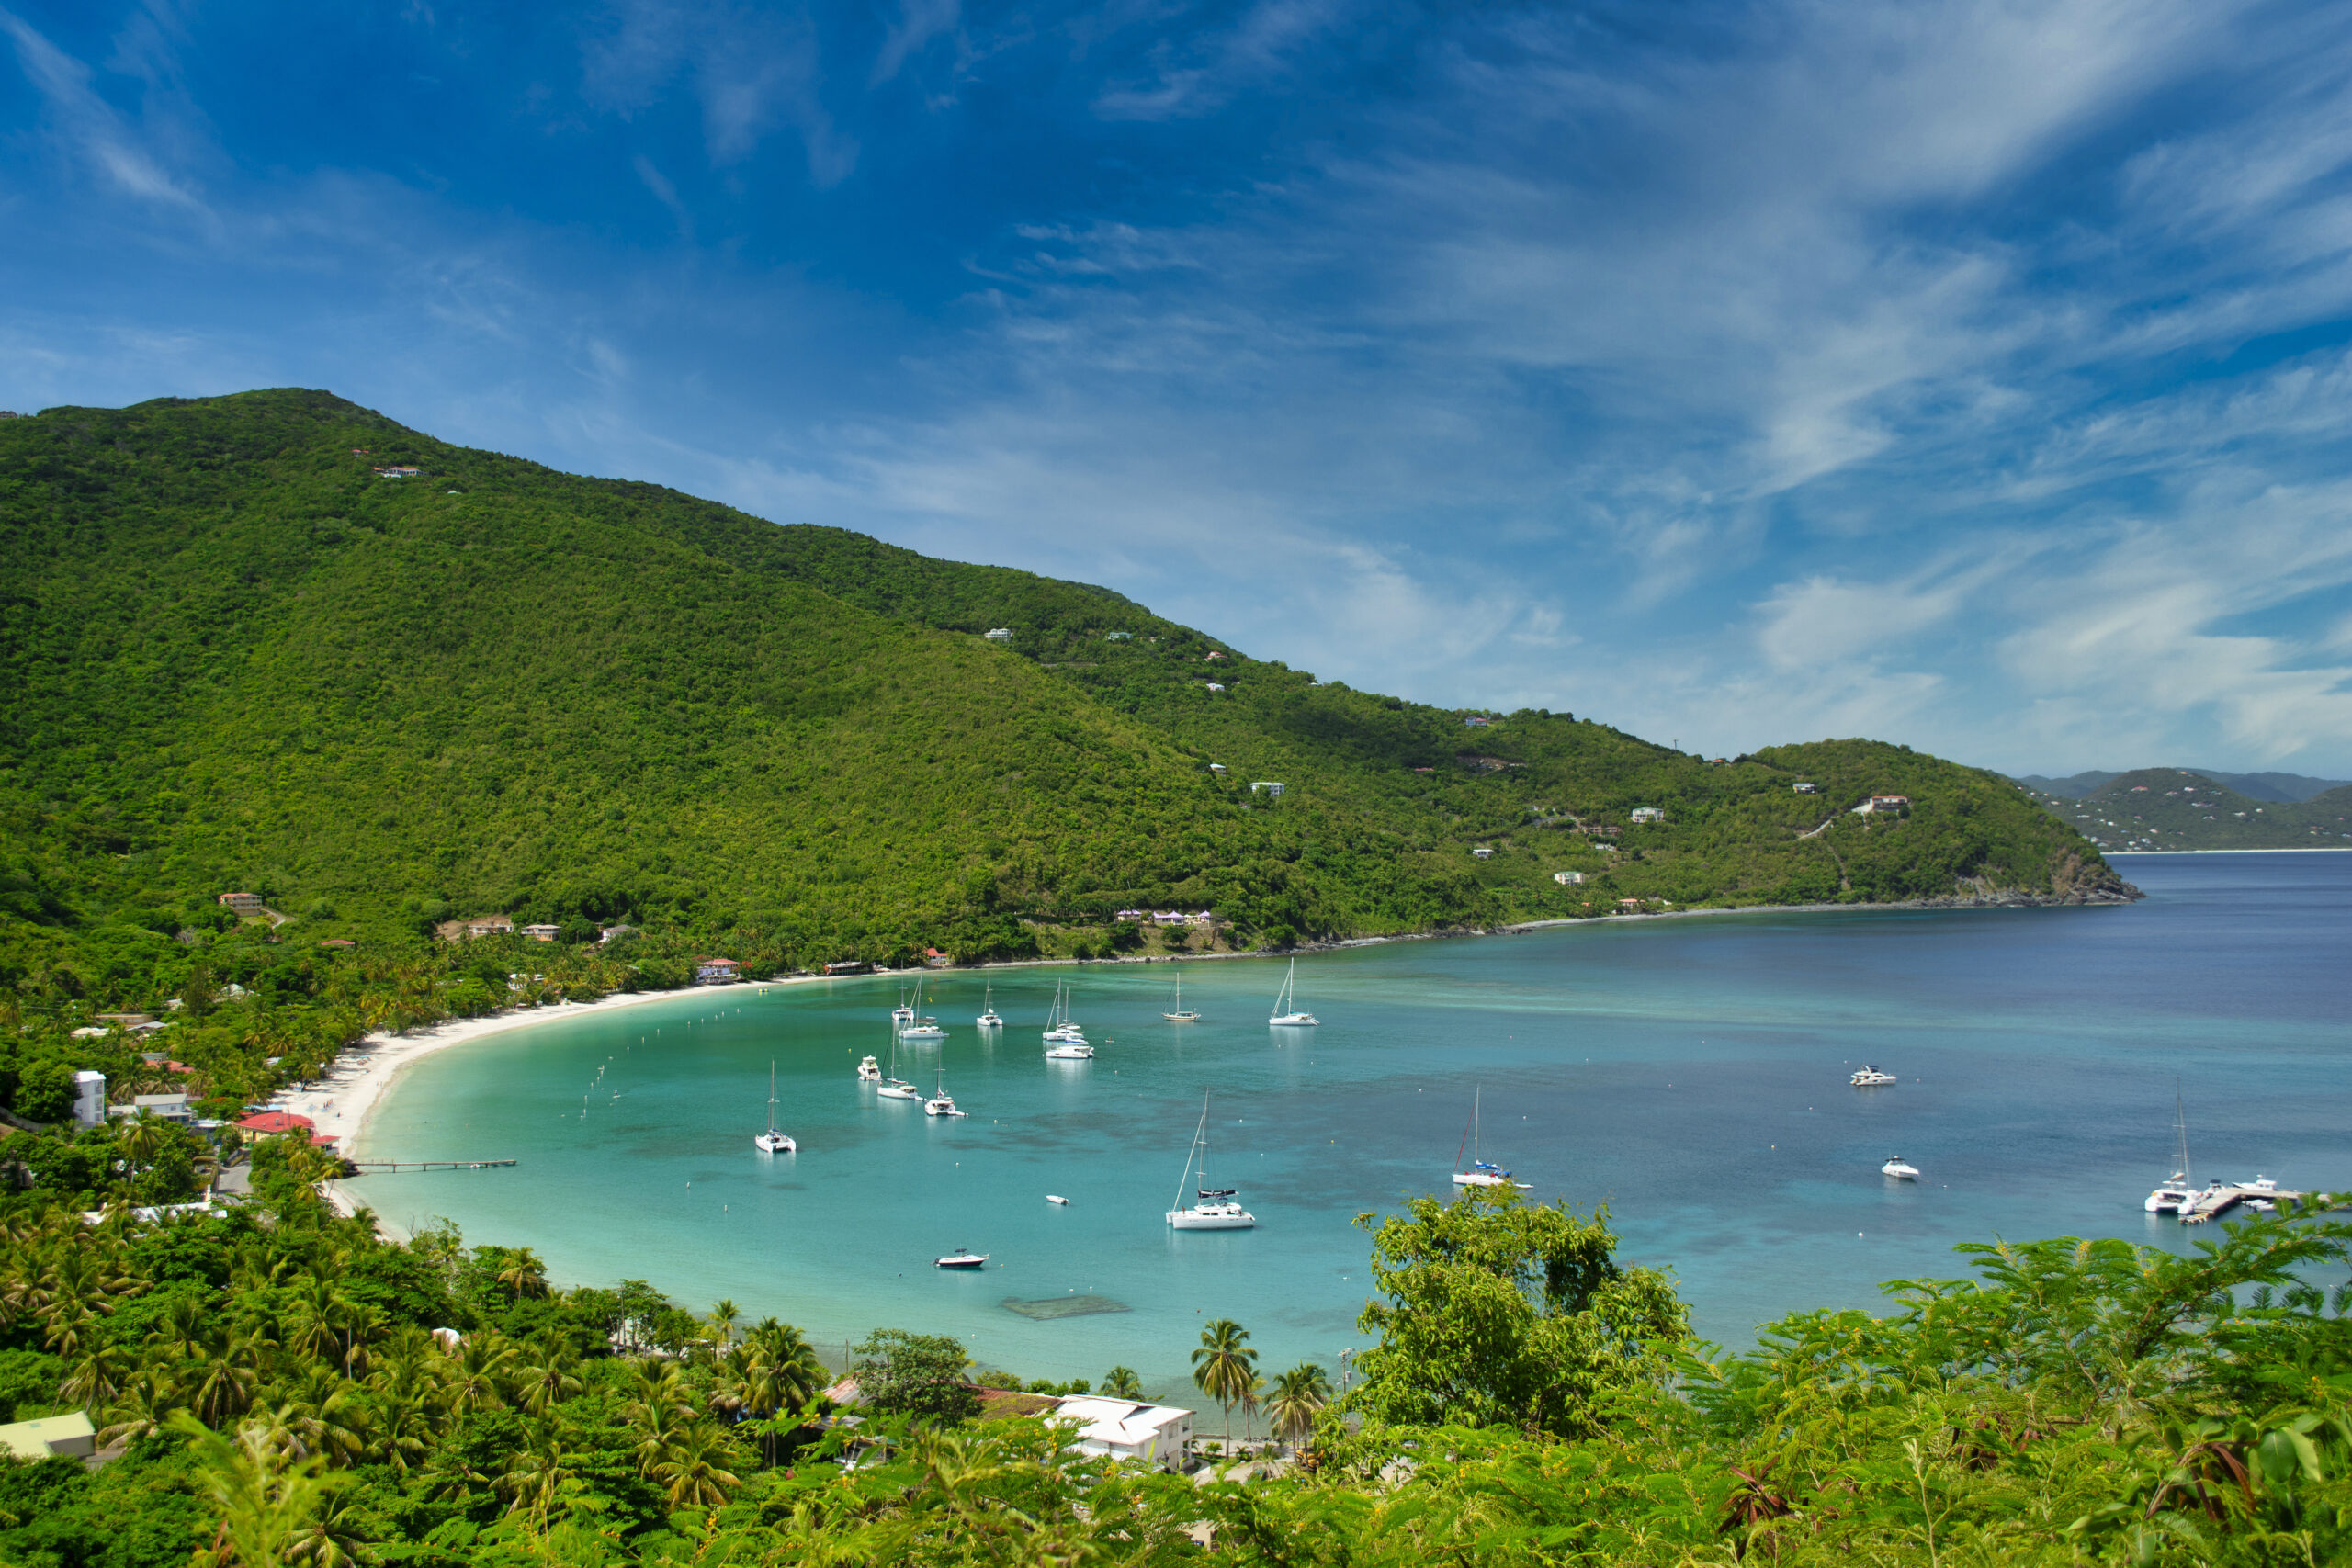 Cane Garden Bay on Tortola, a secluded bay with a thin sting of sandy beach in front of the lush green forest and hills, and boats on the greenish blue water